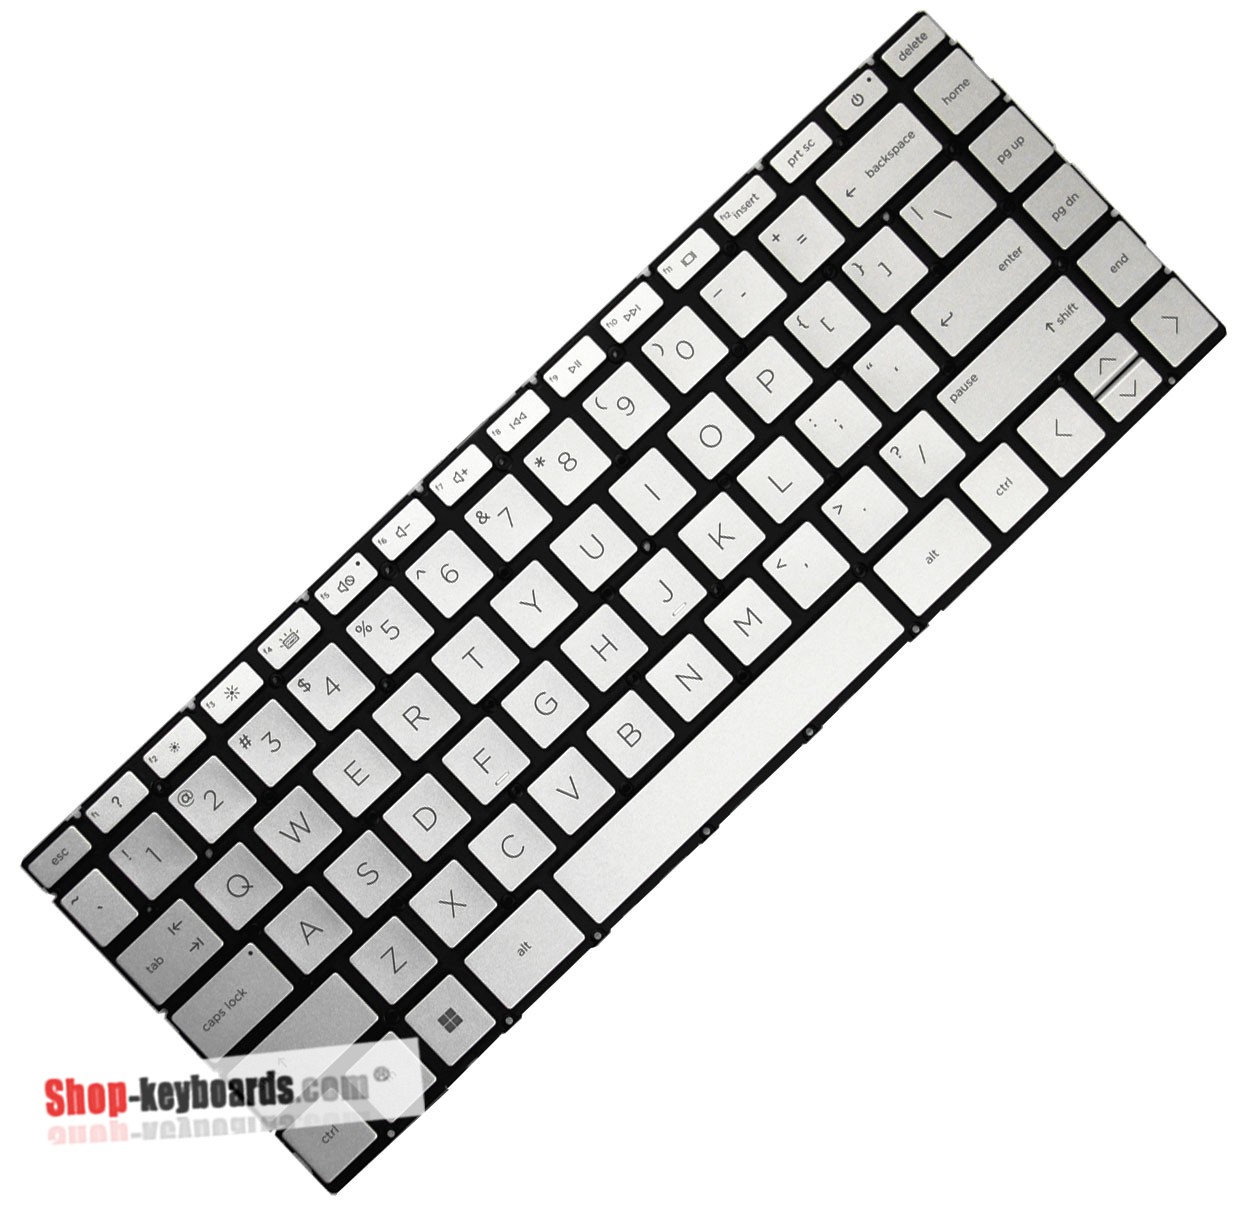 HP SG-A8630-XDA Keyboard replacement